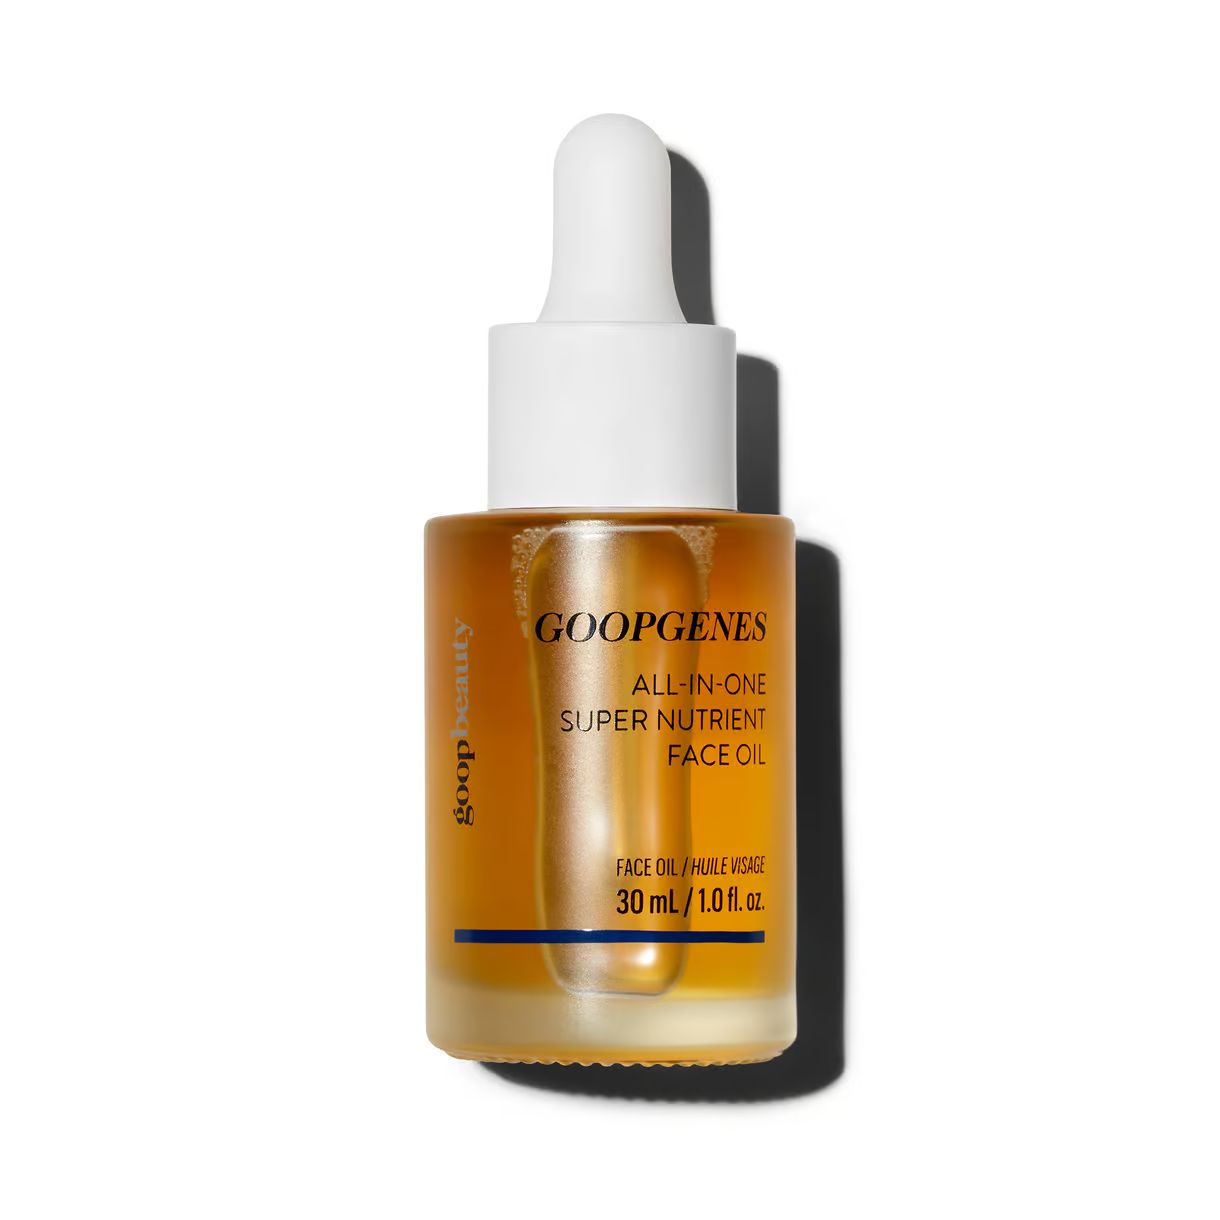 All-in-One Super Nutrient Face Oil | goop